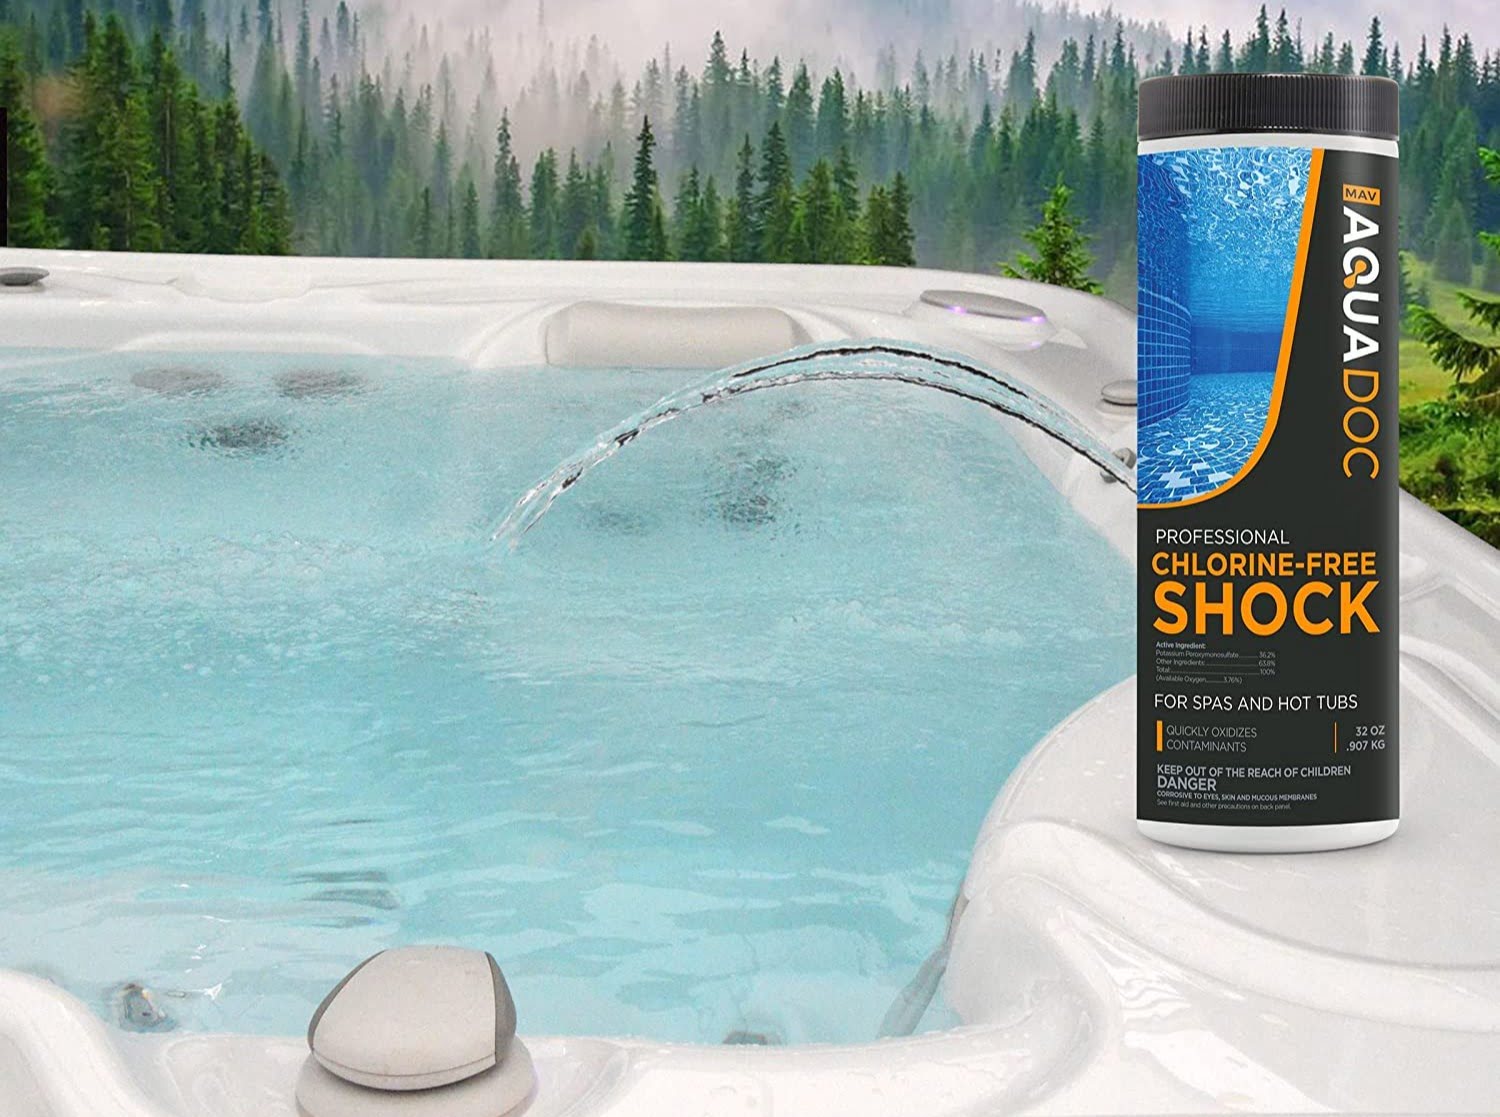 How To Raise Free Chlorine In Hot Tub